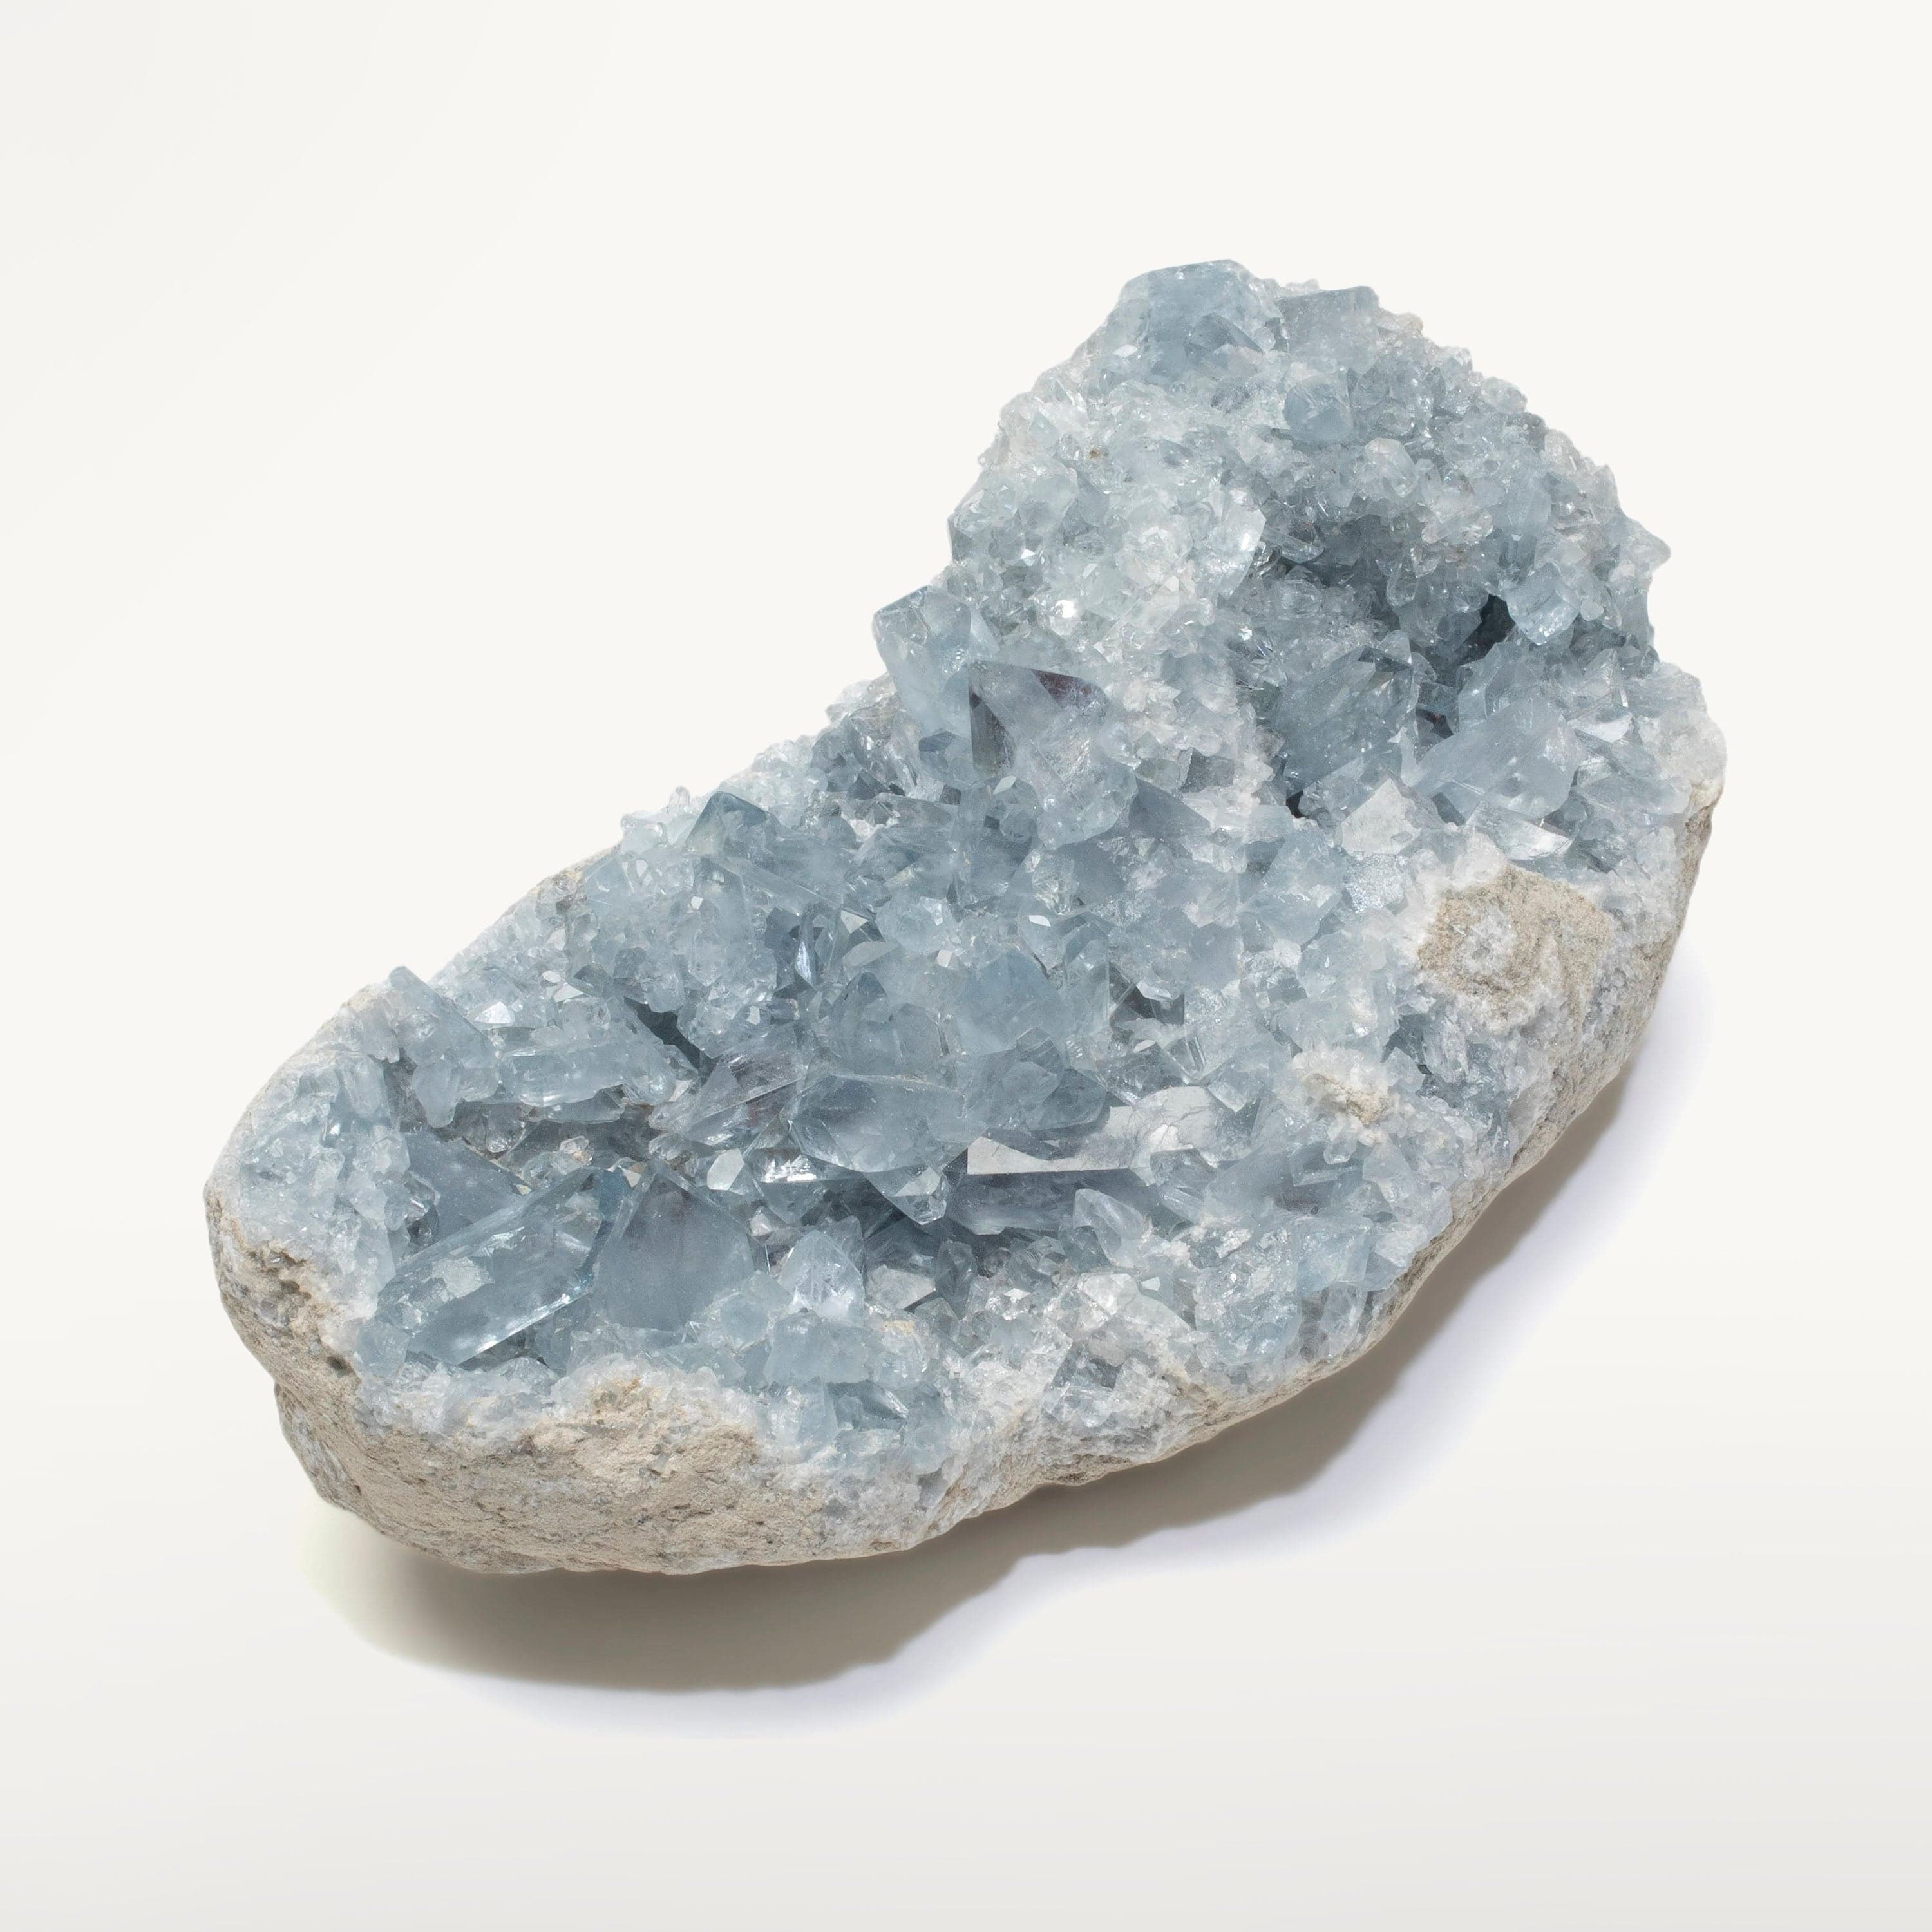 Kalifano Celestite Natural Celestite Crystal Cluster Geode from Madagascar - 9 in. CG1300.003